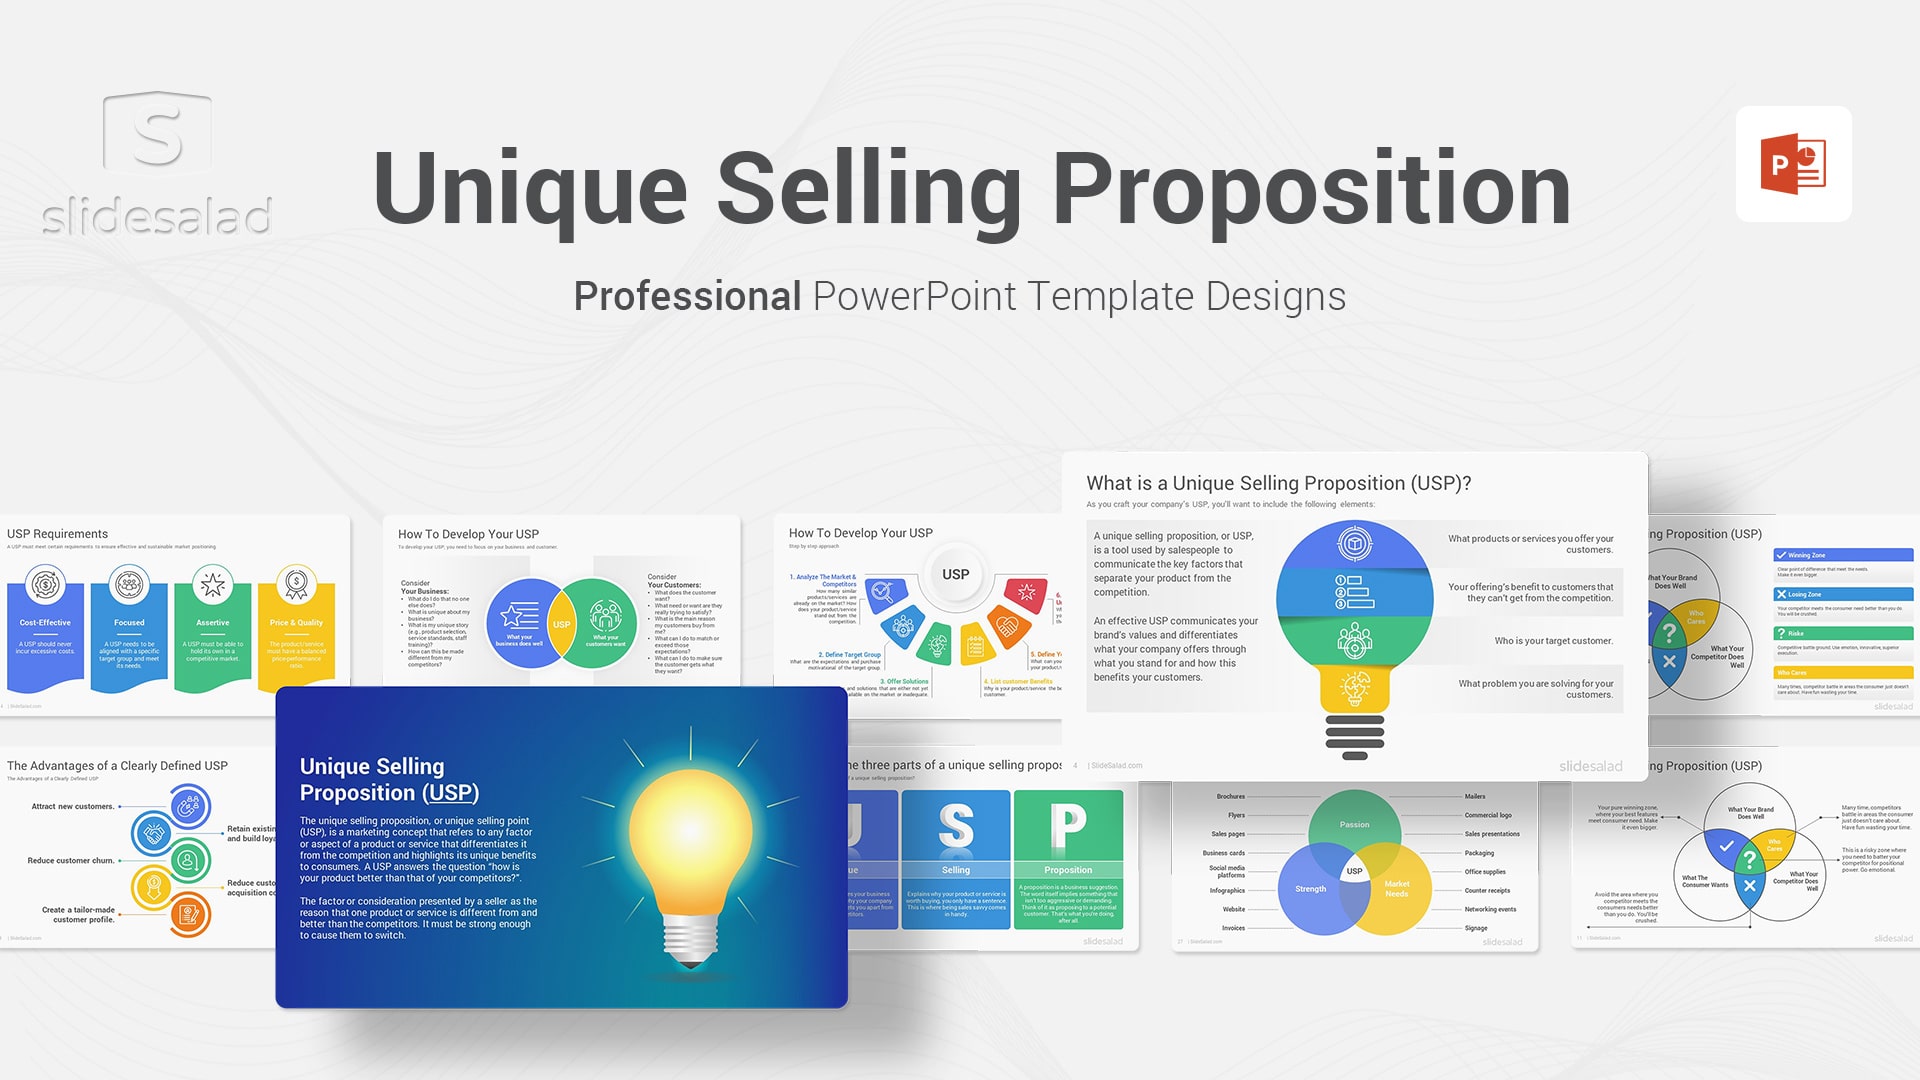 Unique Selling Proposition PowerPoint Template Designs - Attractive Unique Selling Point (USP) Presentation Designs and Infographic Layouts